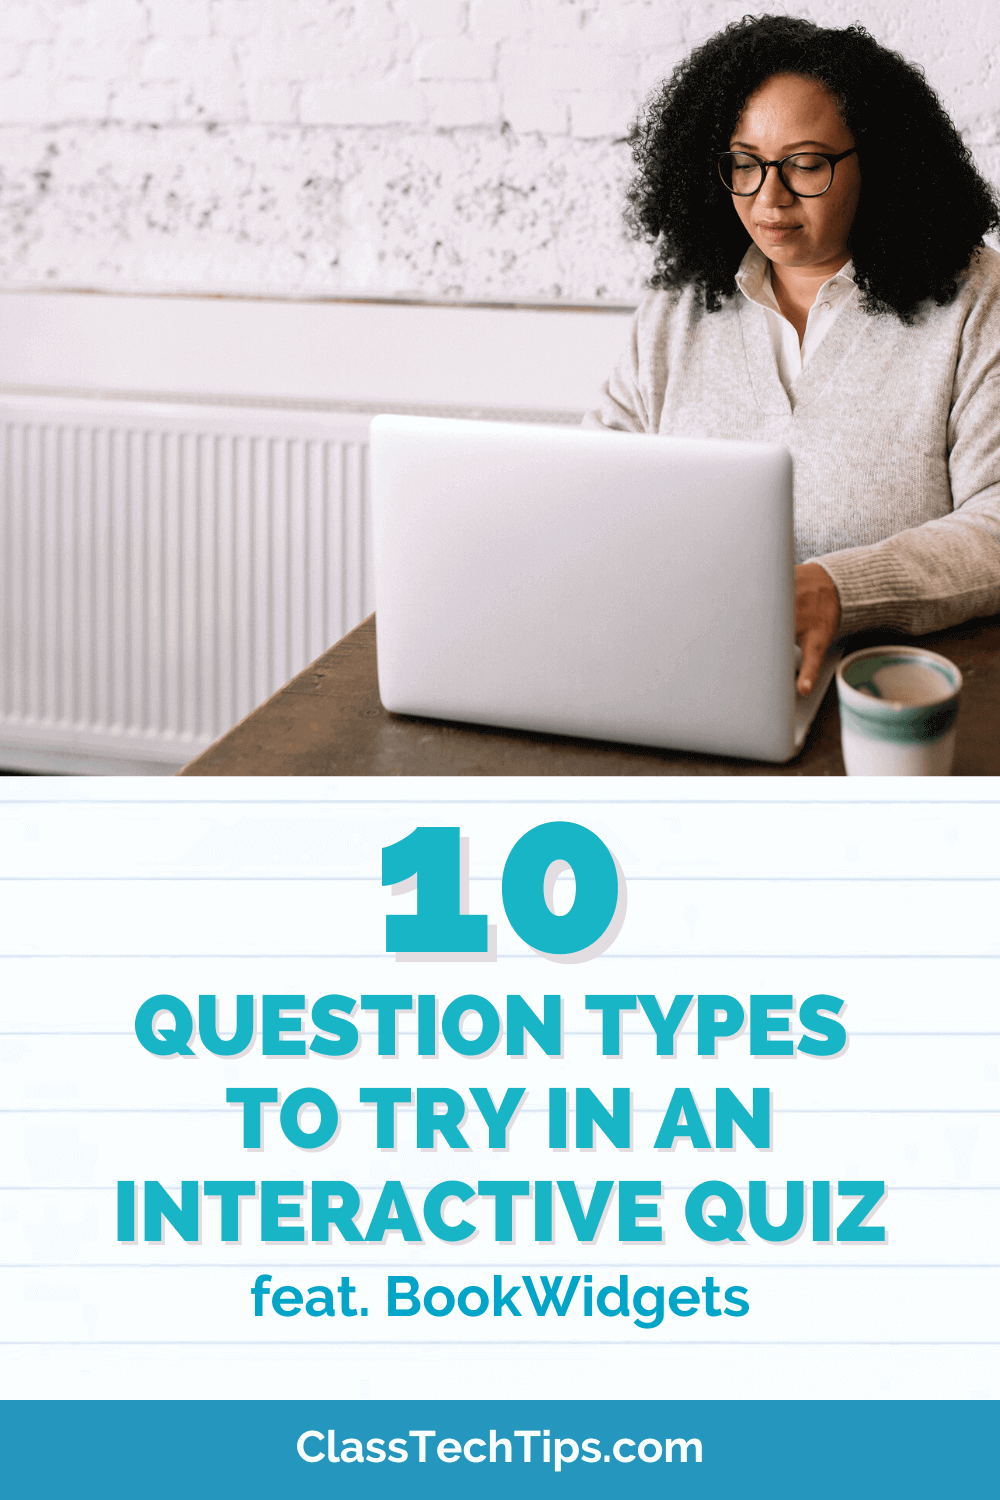 Enthusiastic woman sitting at a desk, exploring quiz question types on her laptop for creating engaging interactive quizzes.